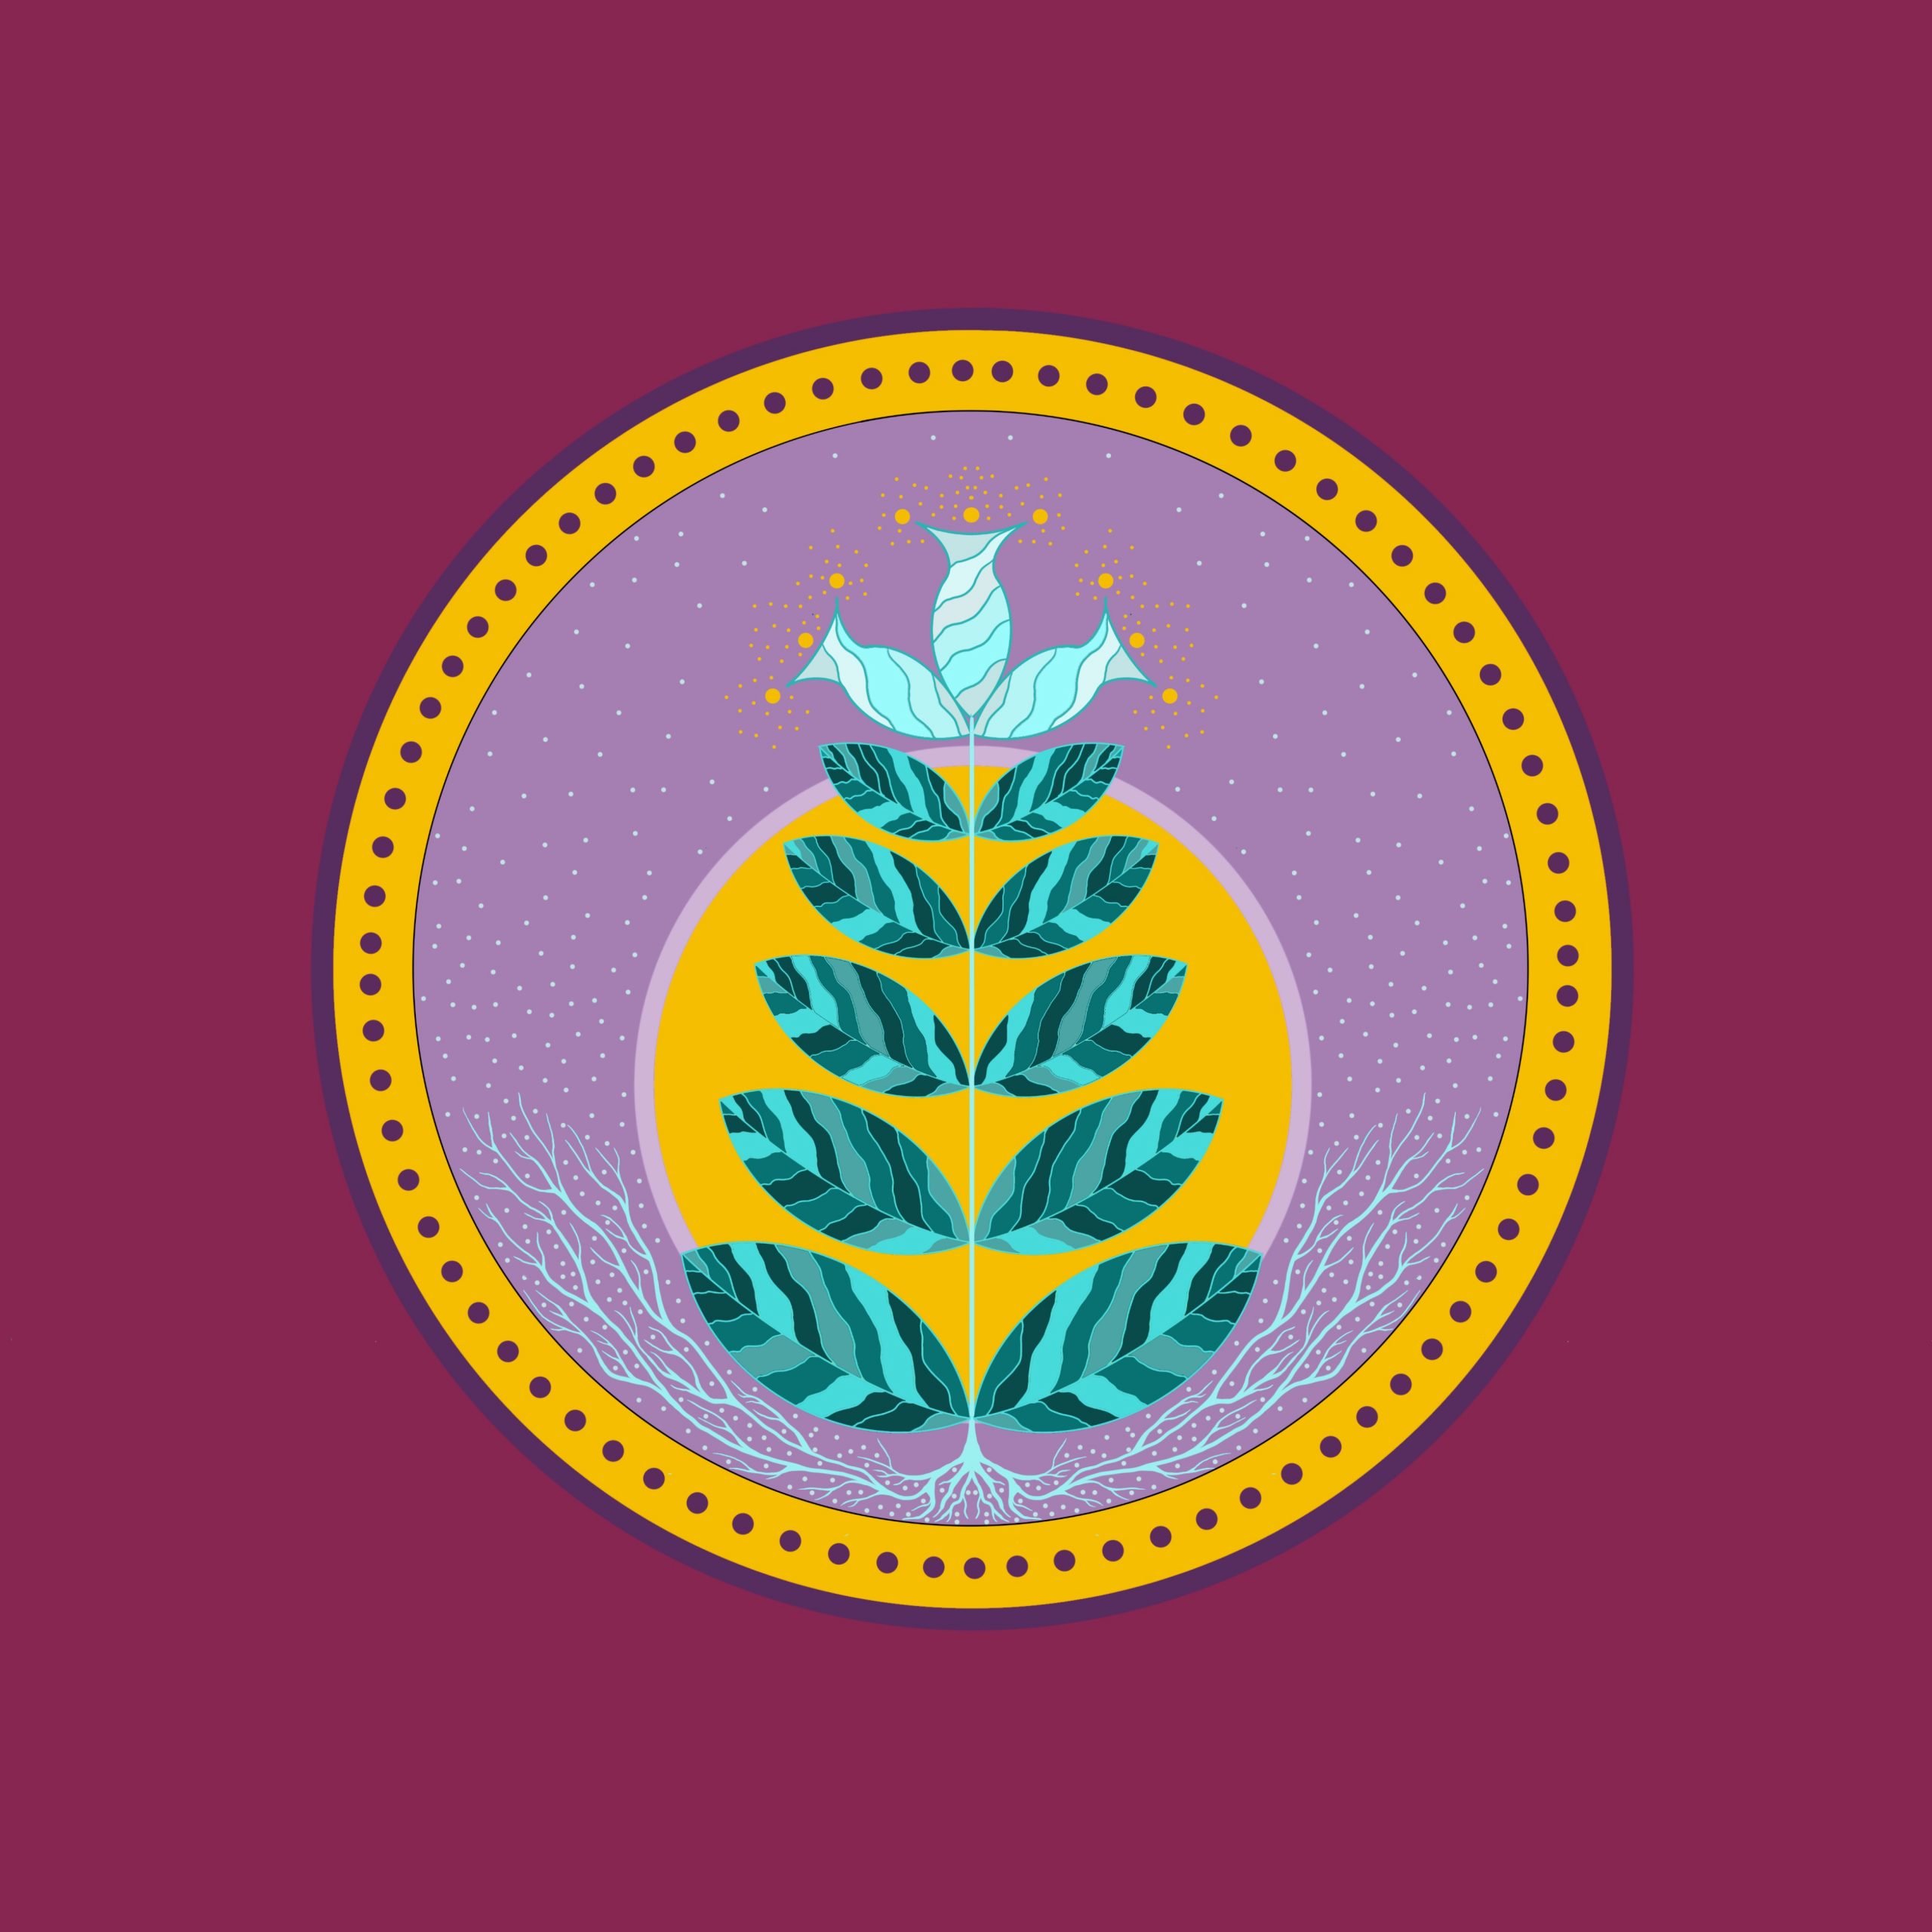 A turquoise-coloured tobacco plant is at the centre of a yellow circle with purple points. Inside the circle a pale lilac colour is sprinkled with tiny turquoise dots reminiscent of the stars. At the very centre of the circle can be found another warm yellow circle evoking the sun. Deep turquoise roots are at the bottom and reaching up in the same colour as the stars. The illustration is set on a raspberry colour background.